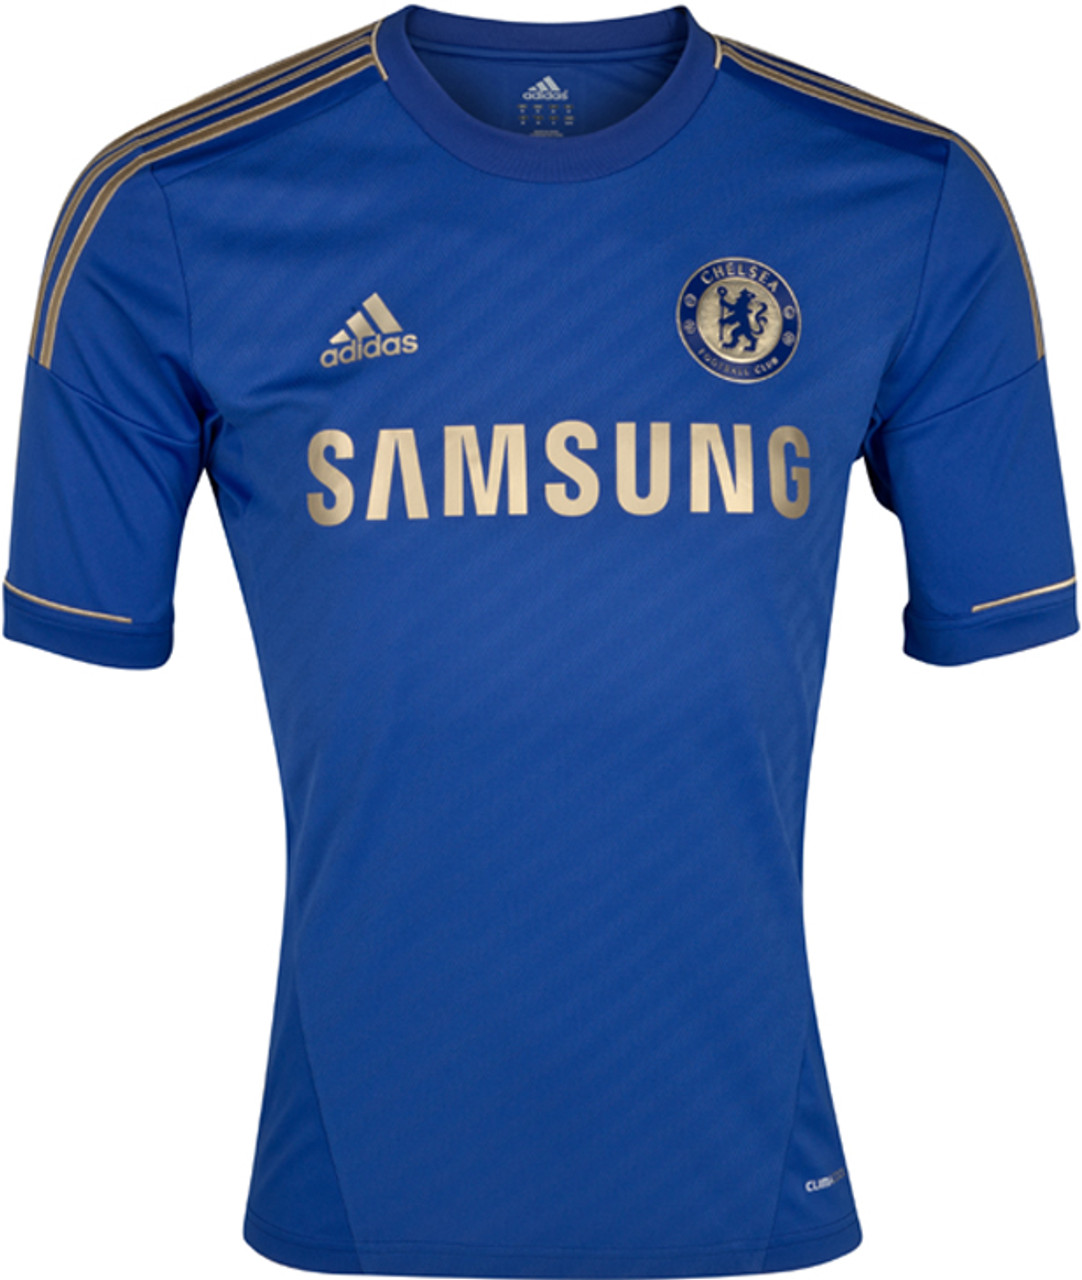 ADIDAS CHELSEA FC 2013 HOME JERSEY 